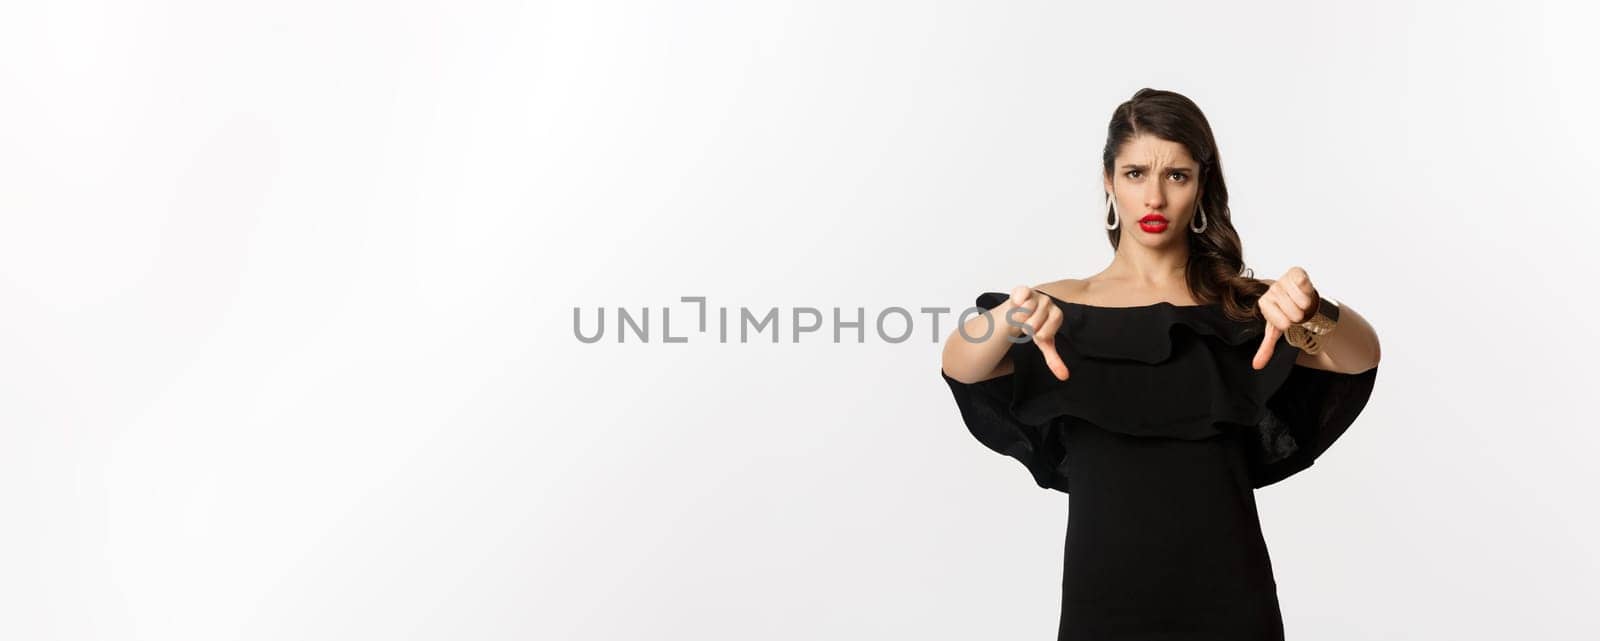 Fashion and beauty. Disappointed and upset woman in black dress, showing thumbs down, dislike something bad, judging over white background.